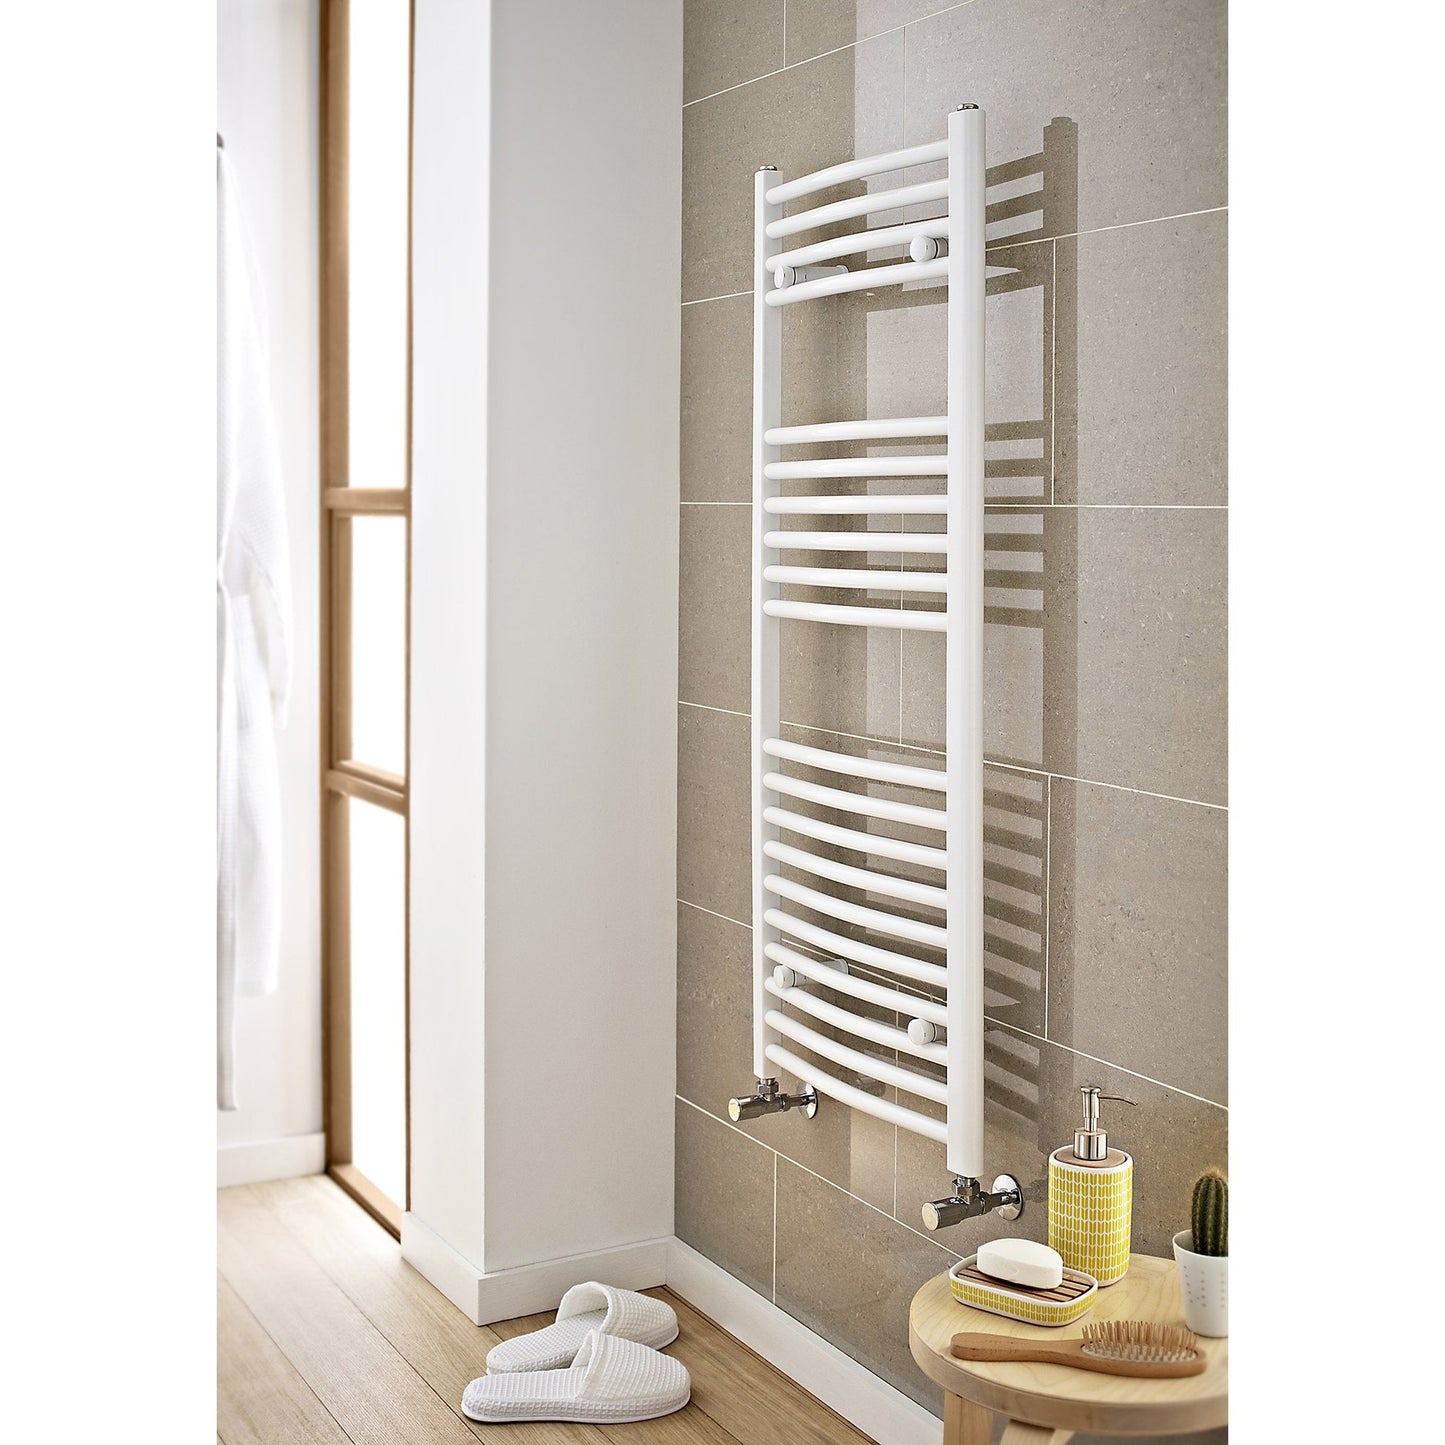 Curved Towel Rail 400mm x 800mm White